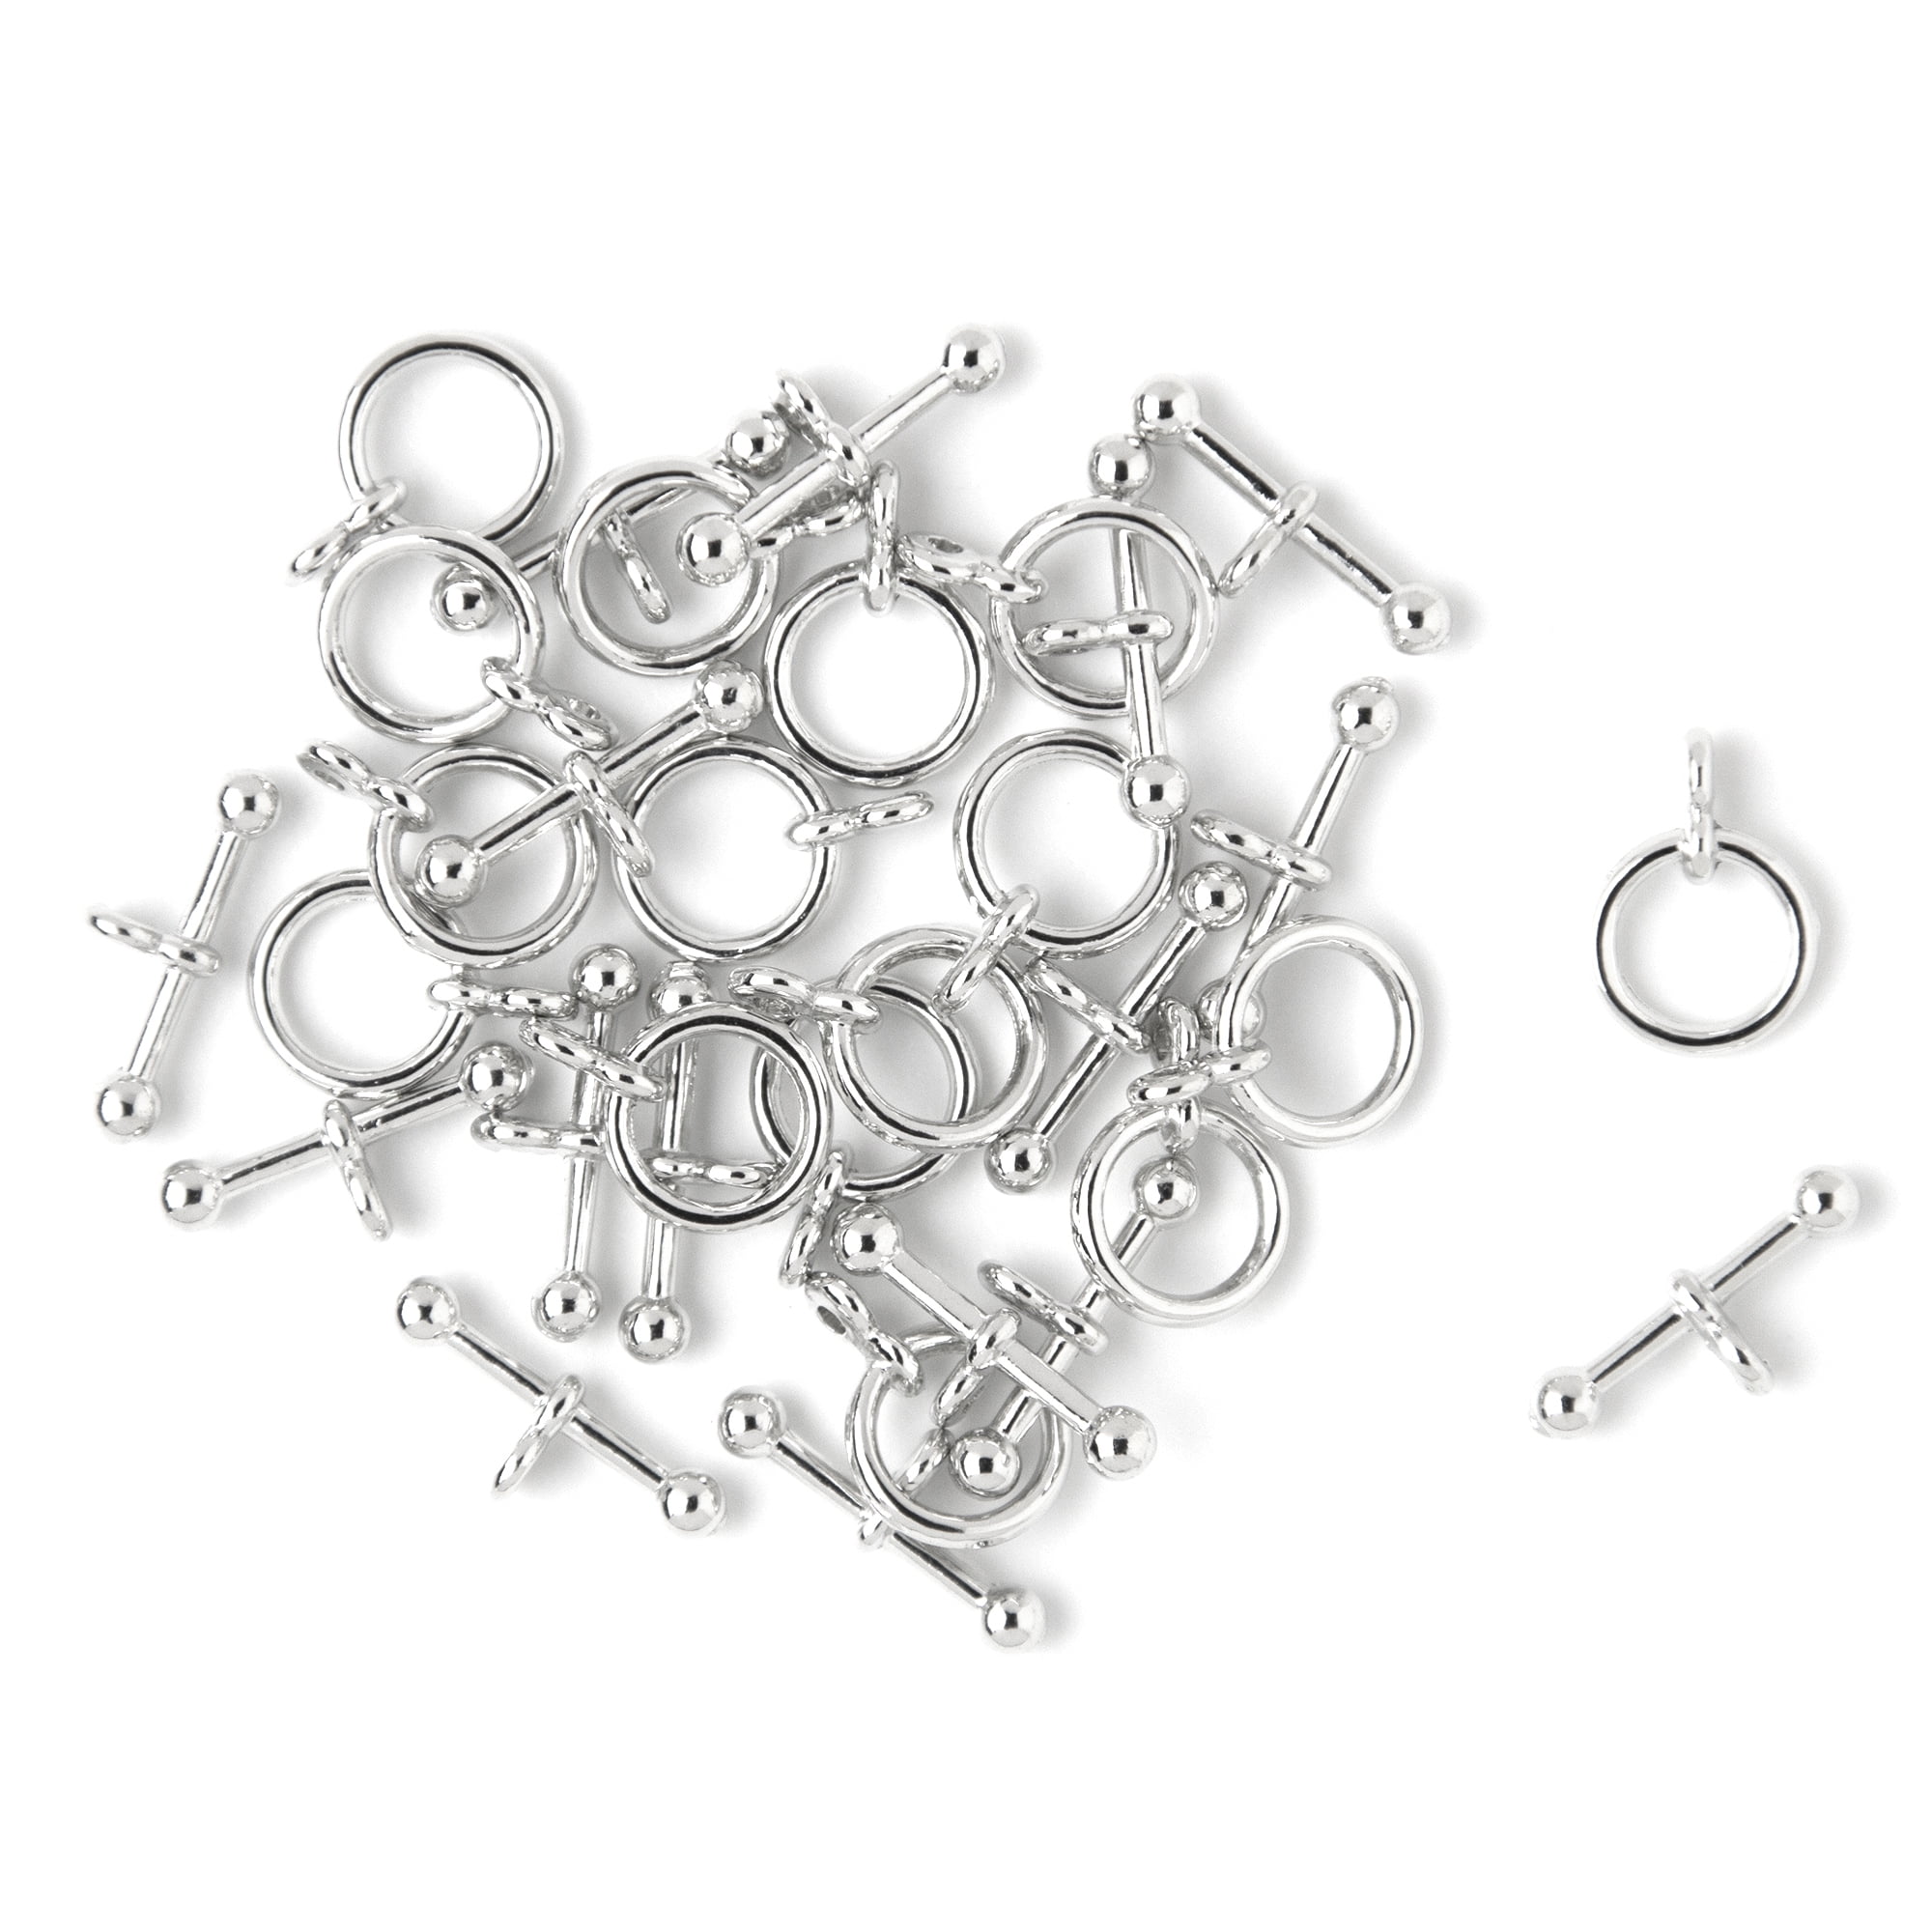 10sets Tibetan Silver Round Ring Toggle Clasps Connector DIY Jewelry Findings